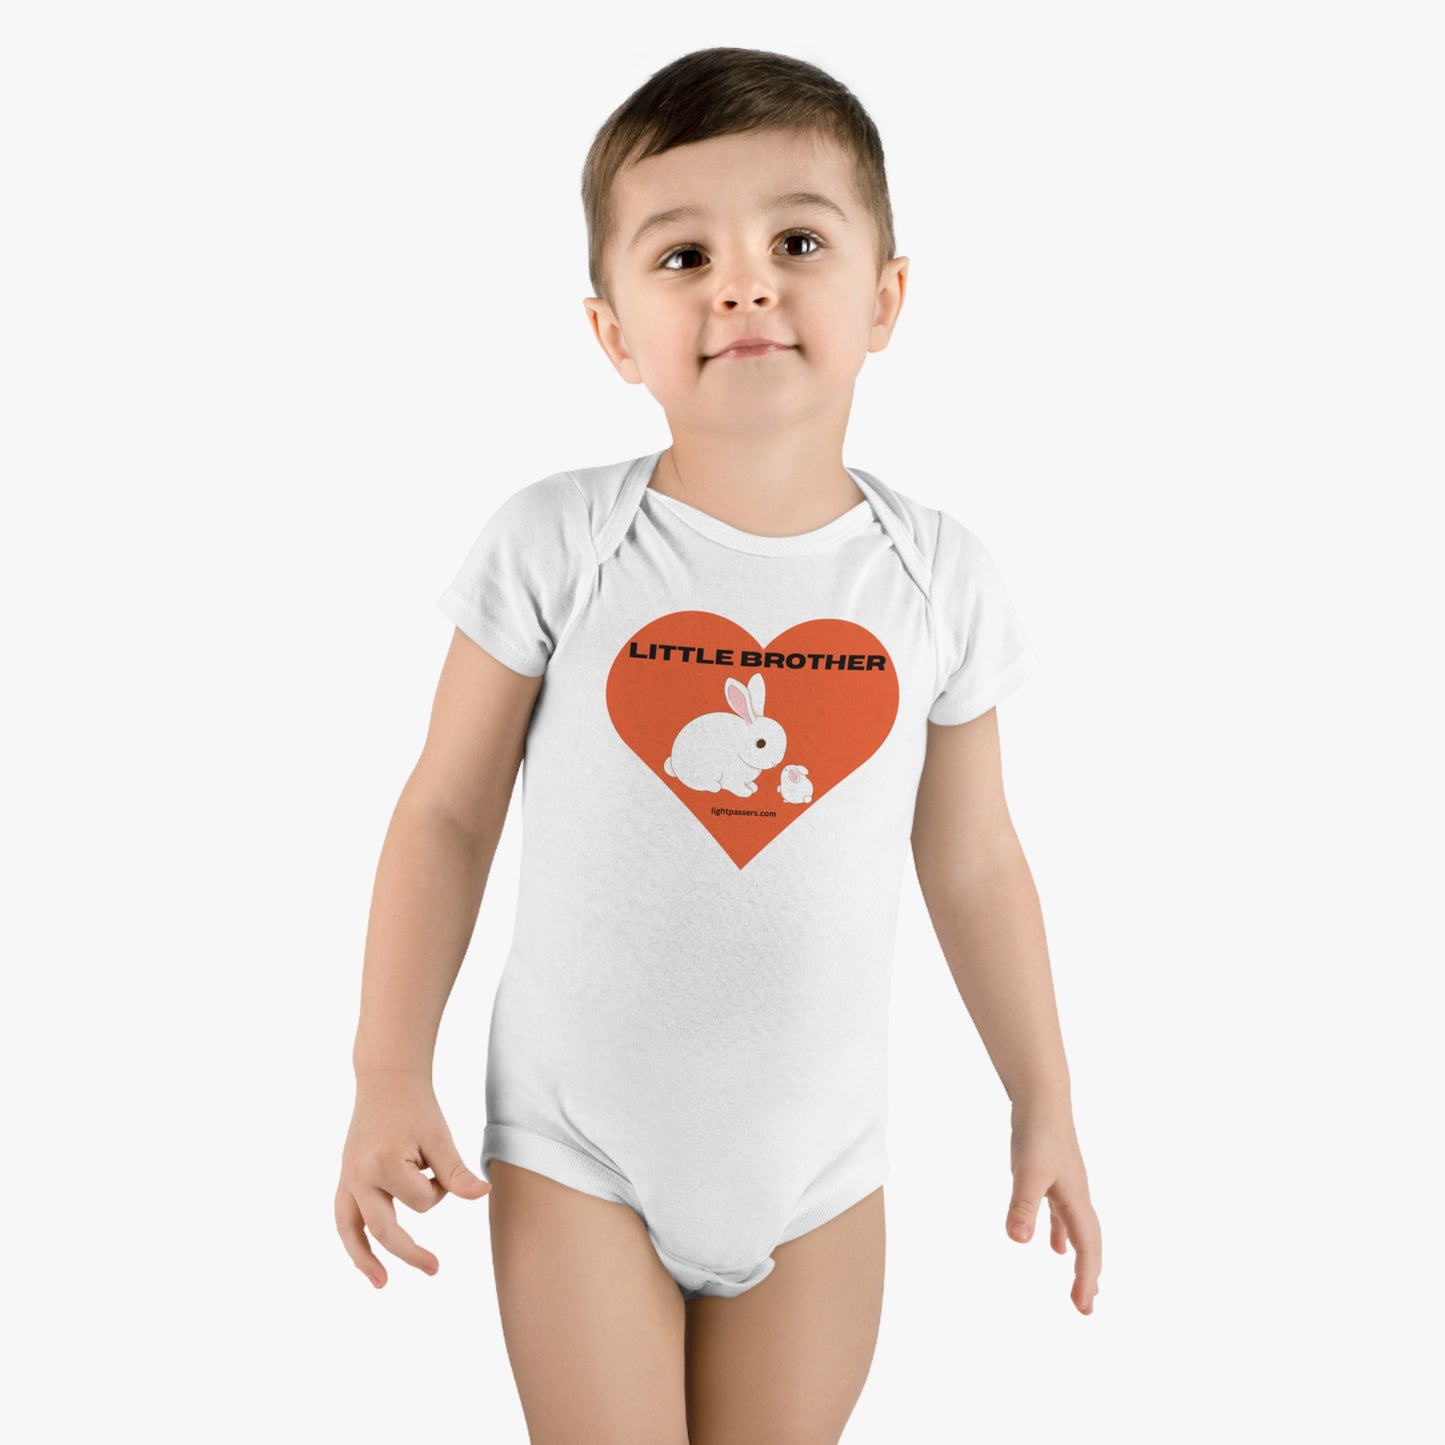 Light Passers Marketplace "Little Brother" Onesie® Organic Baby Bodysuit in white Simple Messages